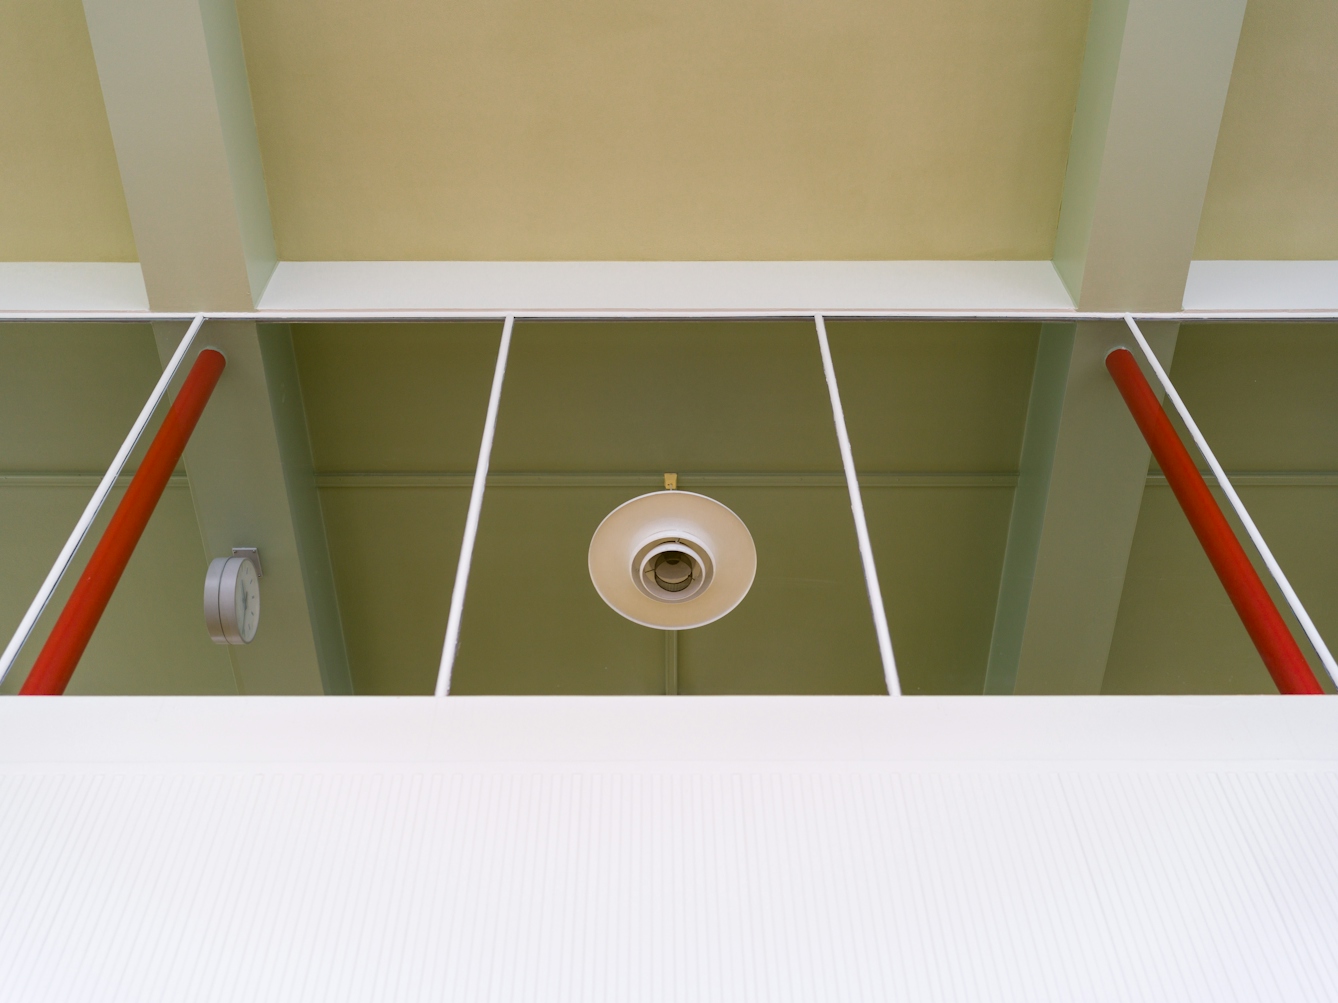 Photograph of an architectural detail inside the Paimio Sanatorium, designed and built by the architect Alvar Aalto.